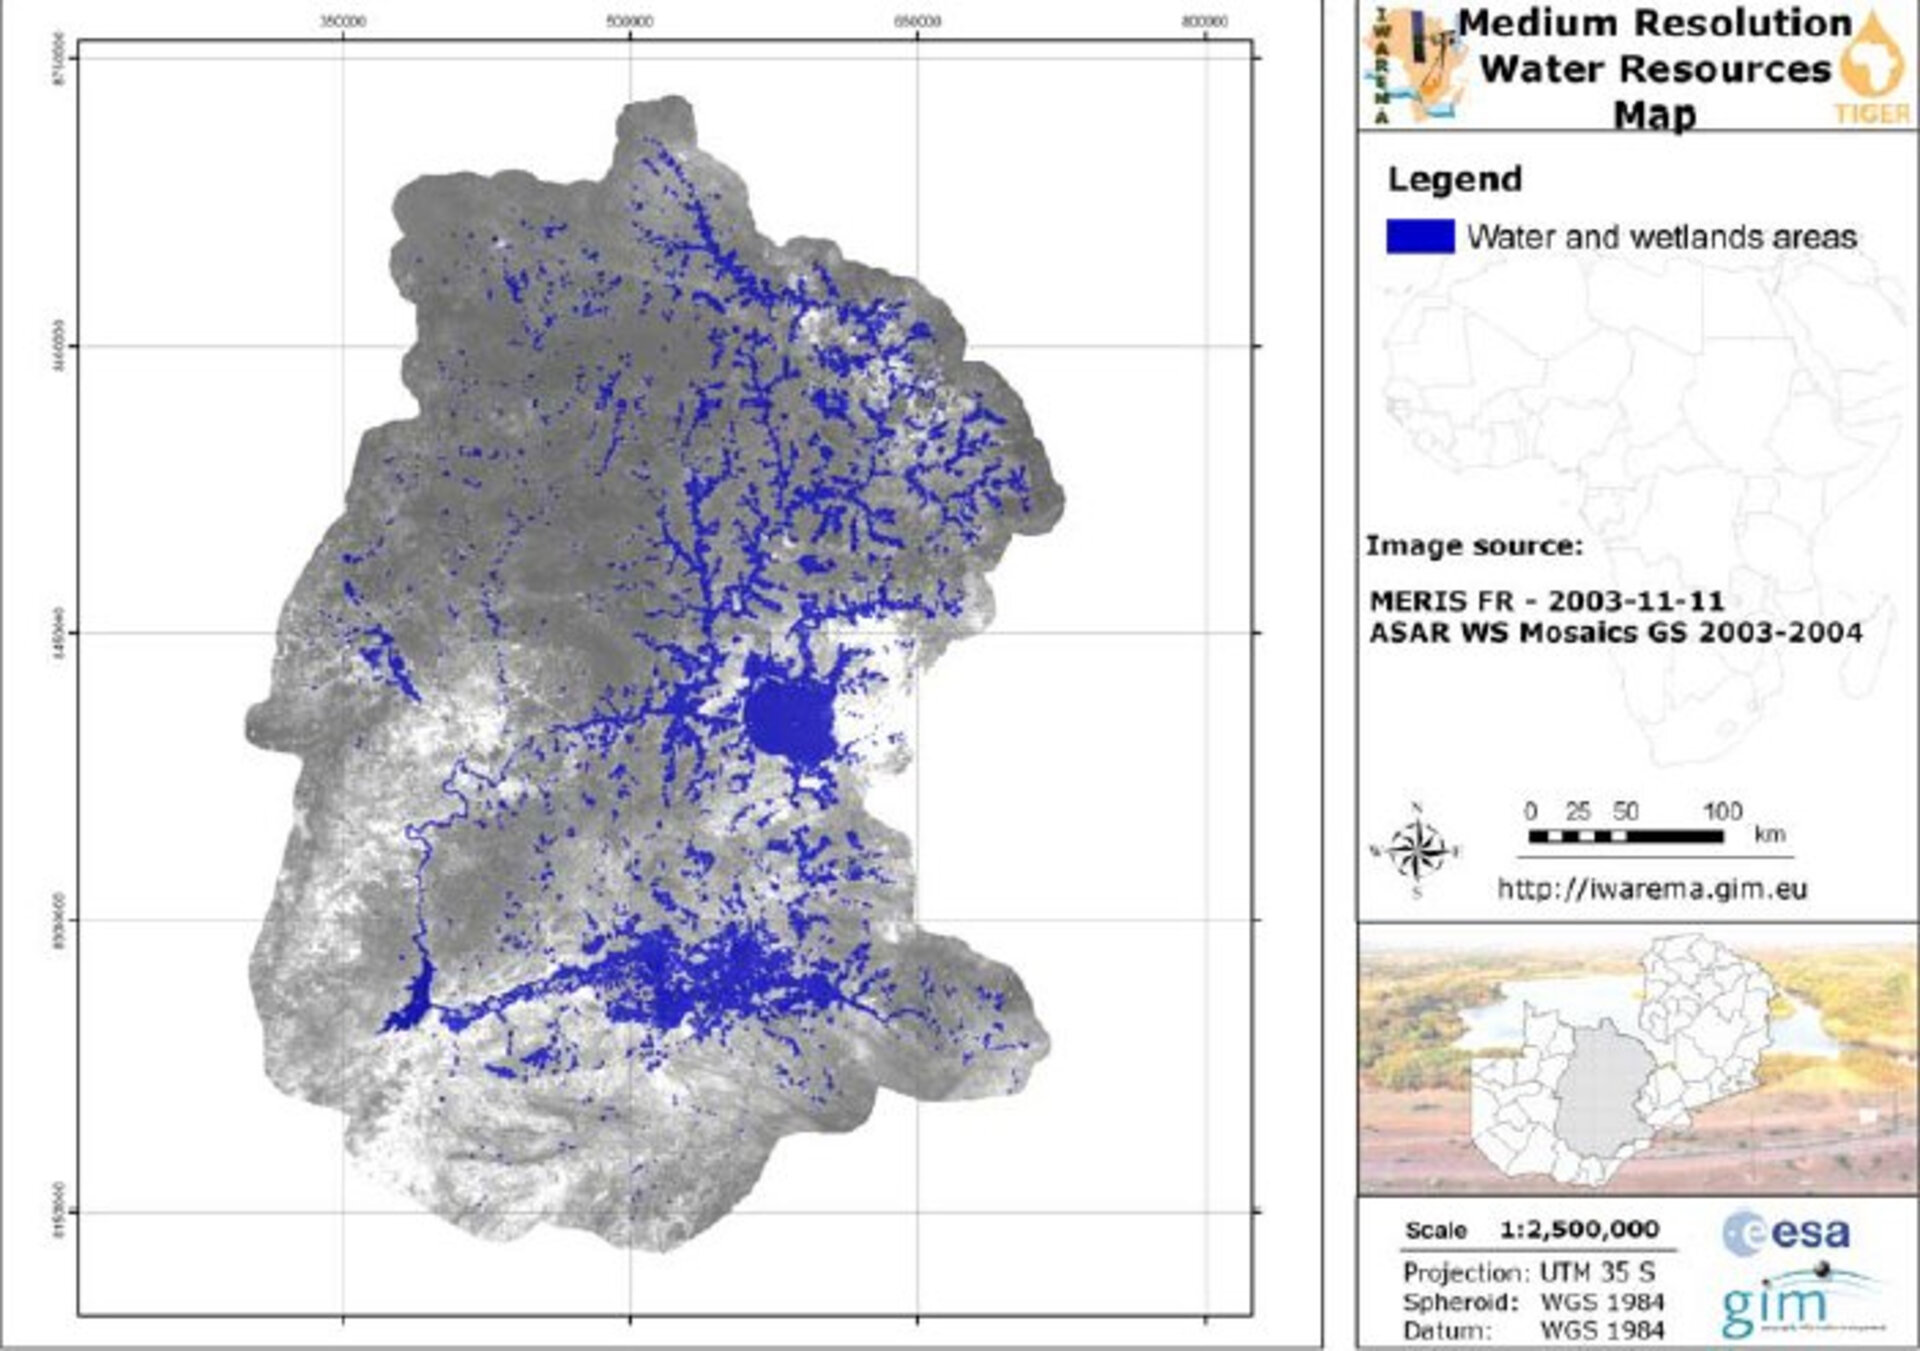 Water resources map of Zambia